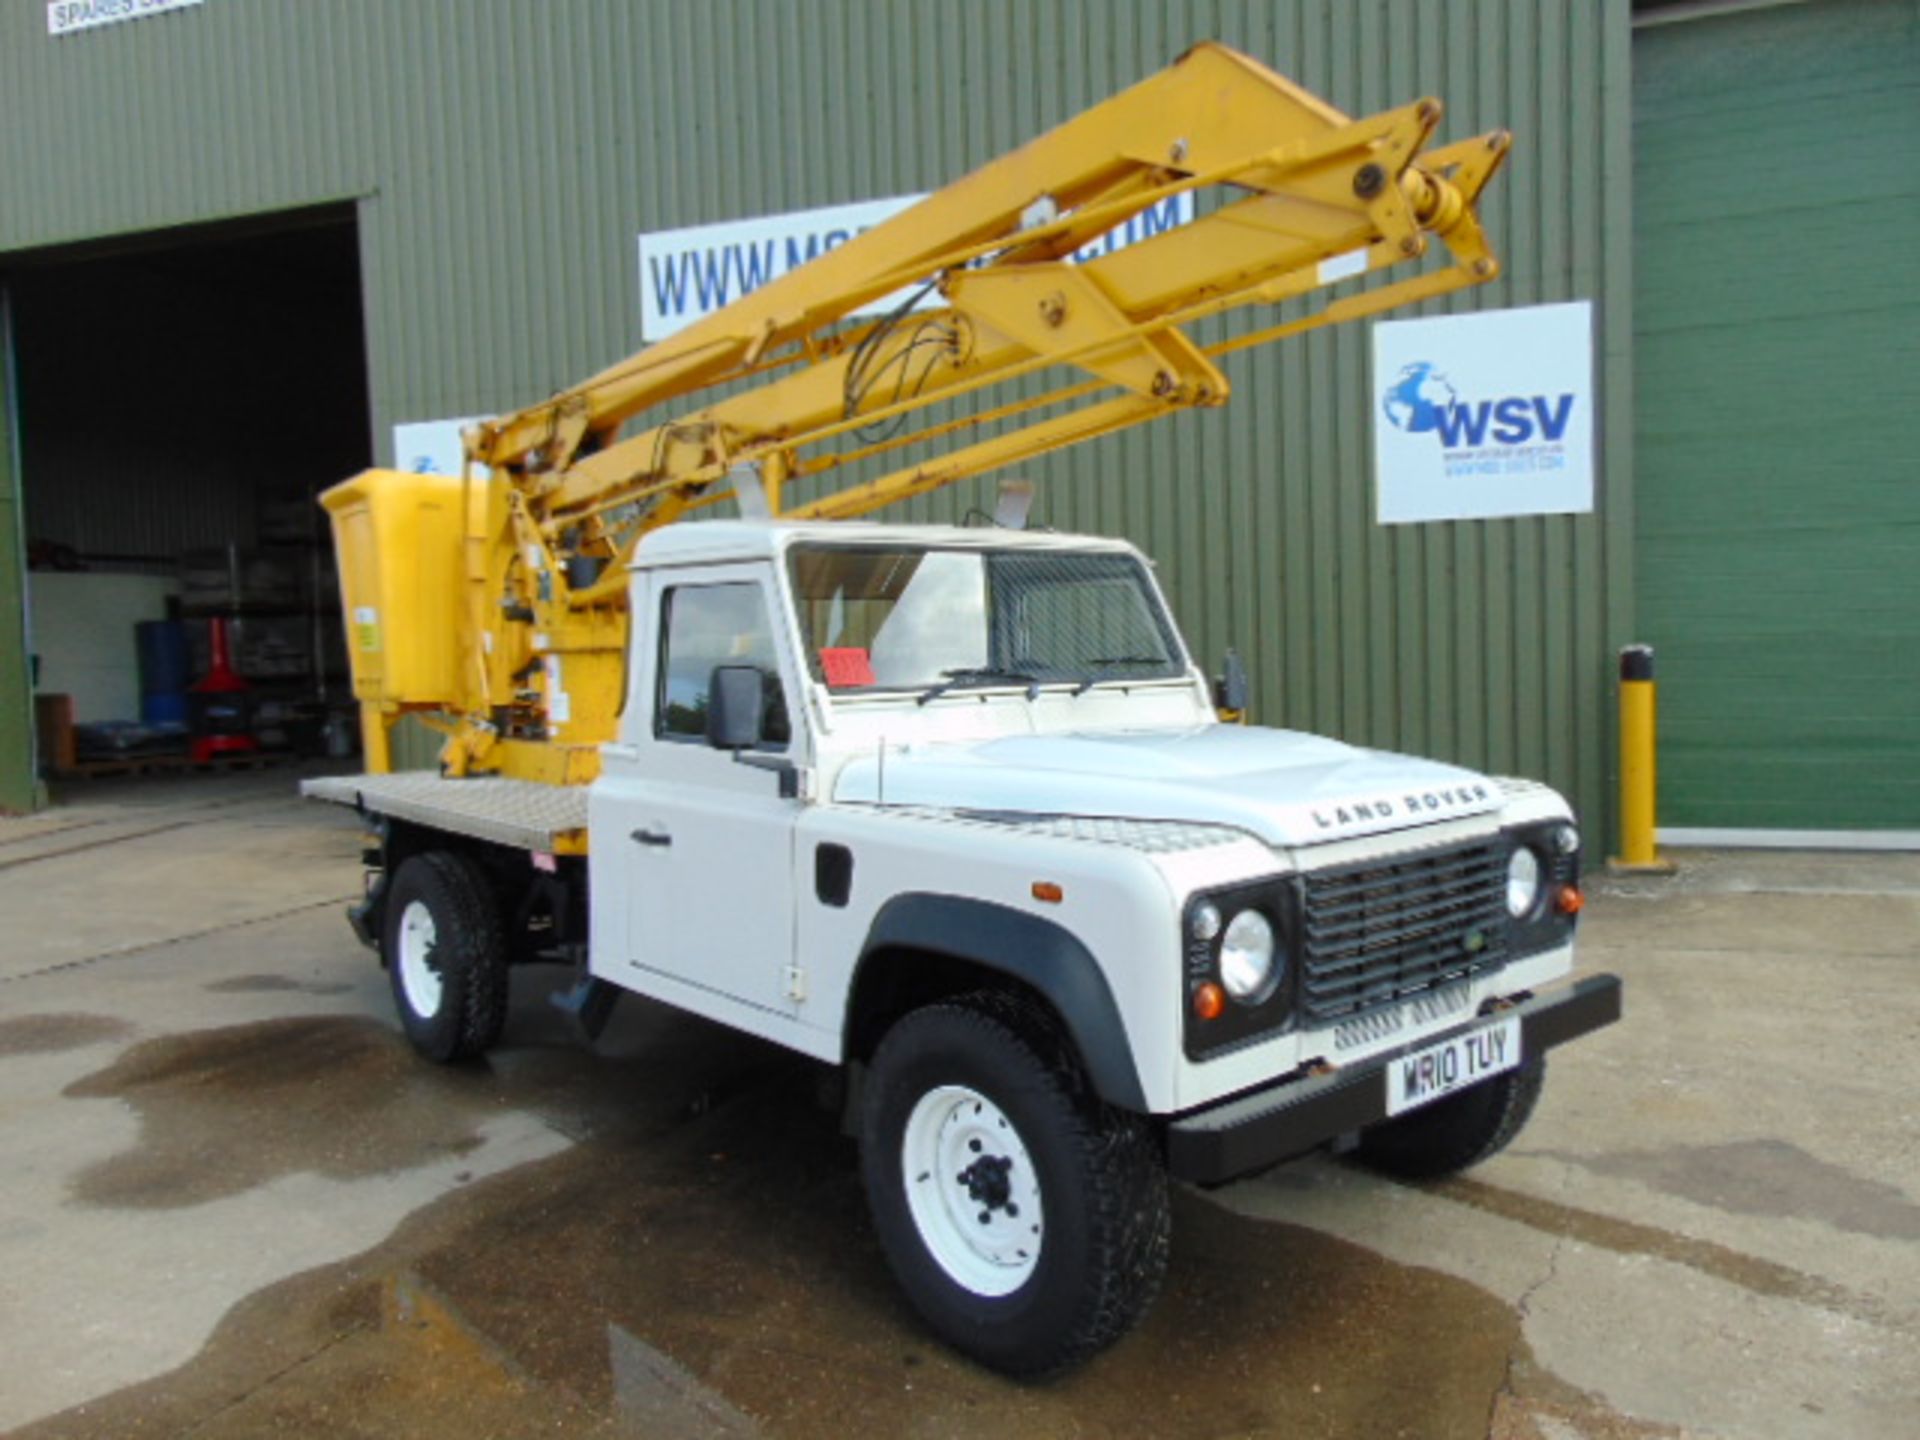 2010 Land Rover Defender 130 2.4 Puma Cherry Picker / Access Lift ONLY 83,760 MILES! - Image 4 of 32